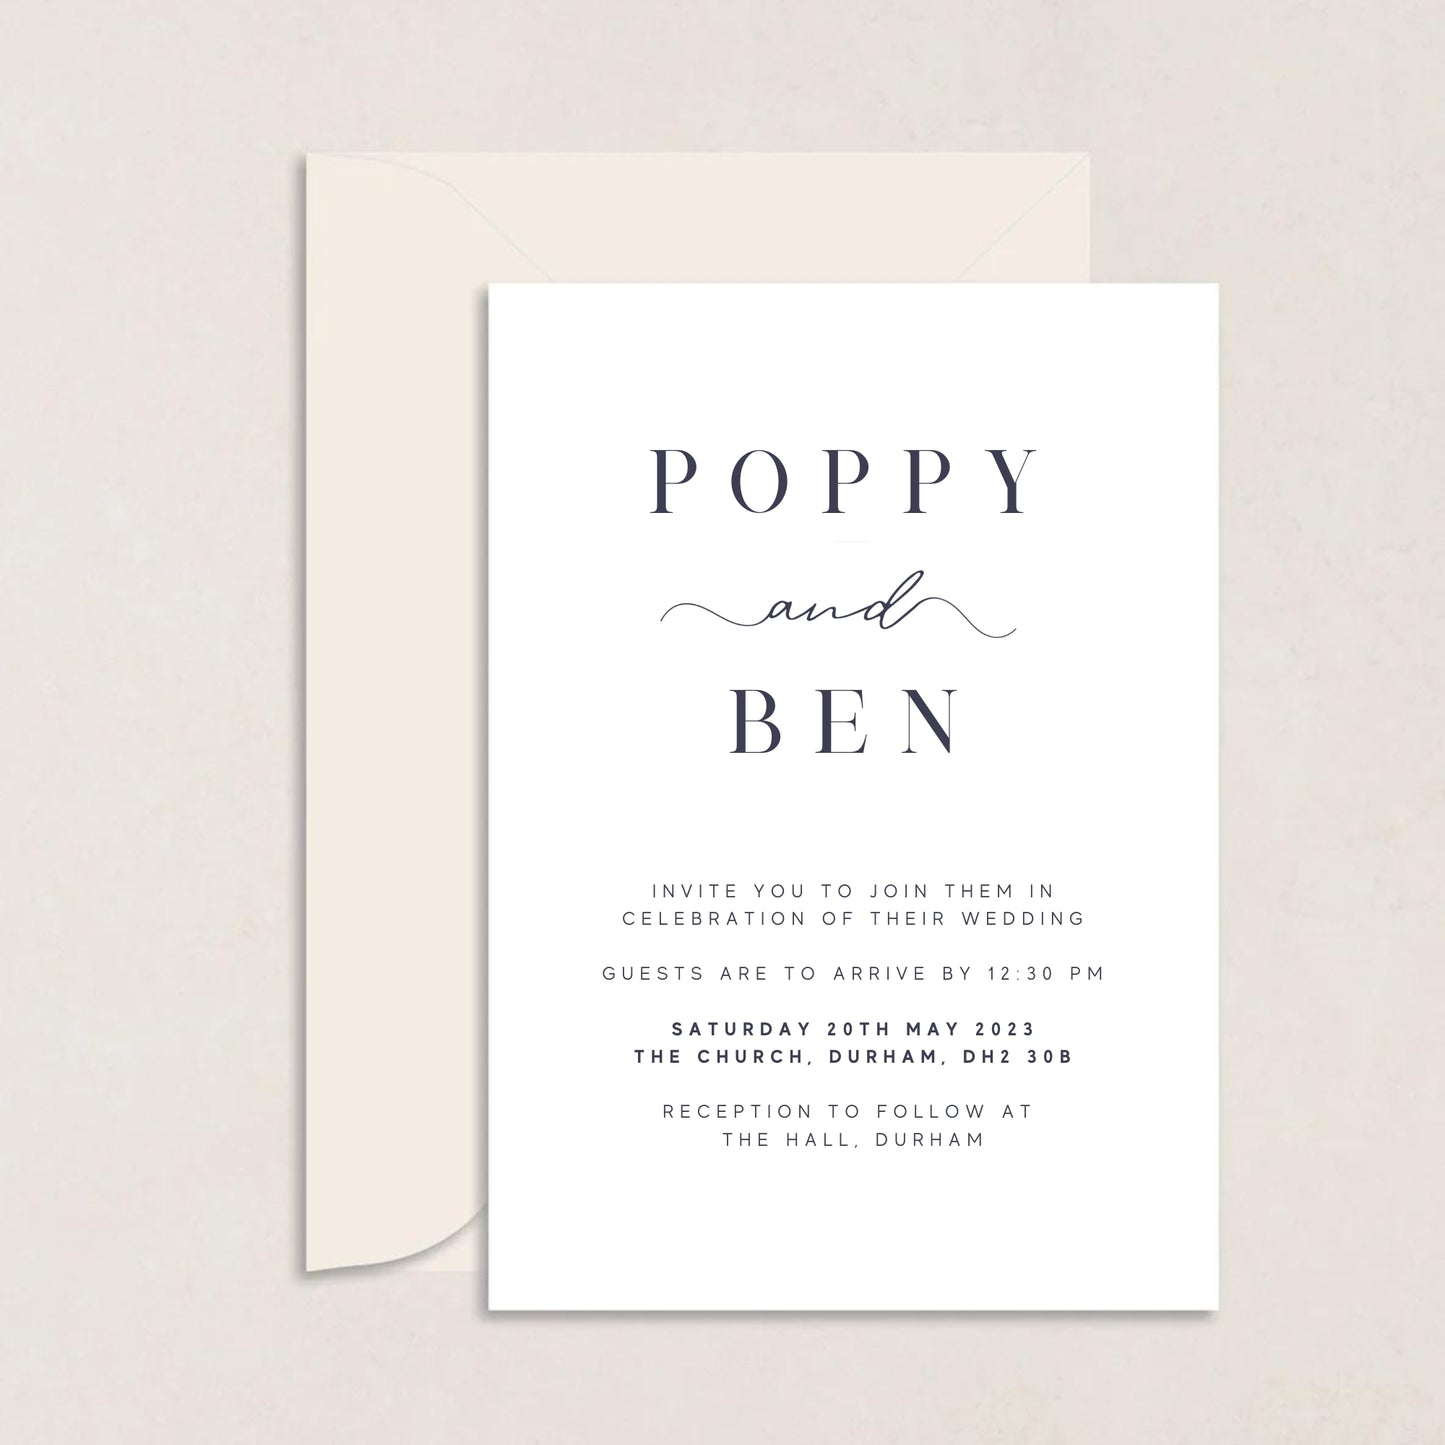 POPPY Wedding Invitations - Wedding Invitations available at The Ivy Collection | Luxury Wedding Stationery